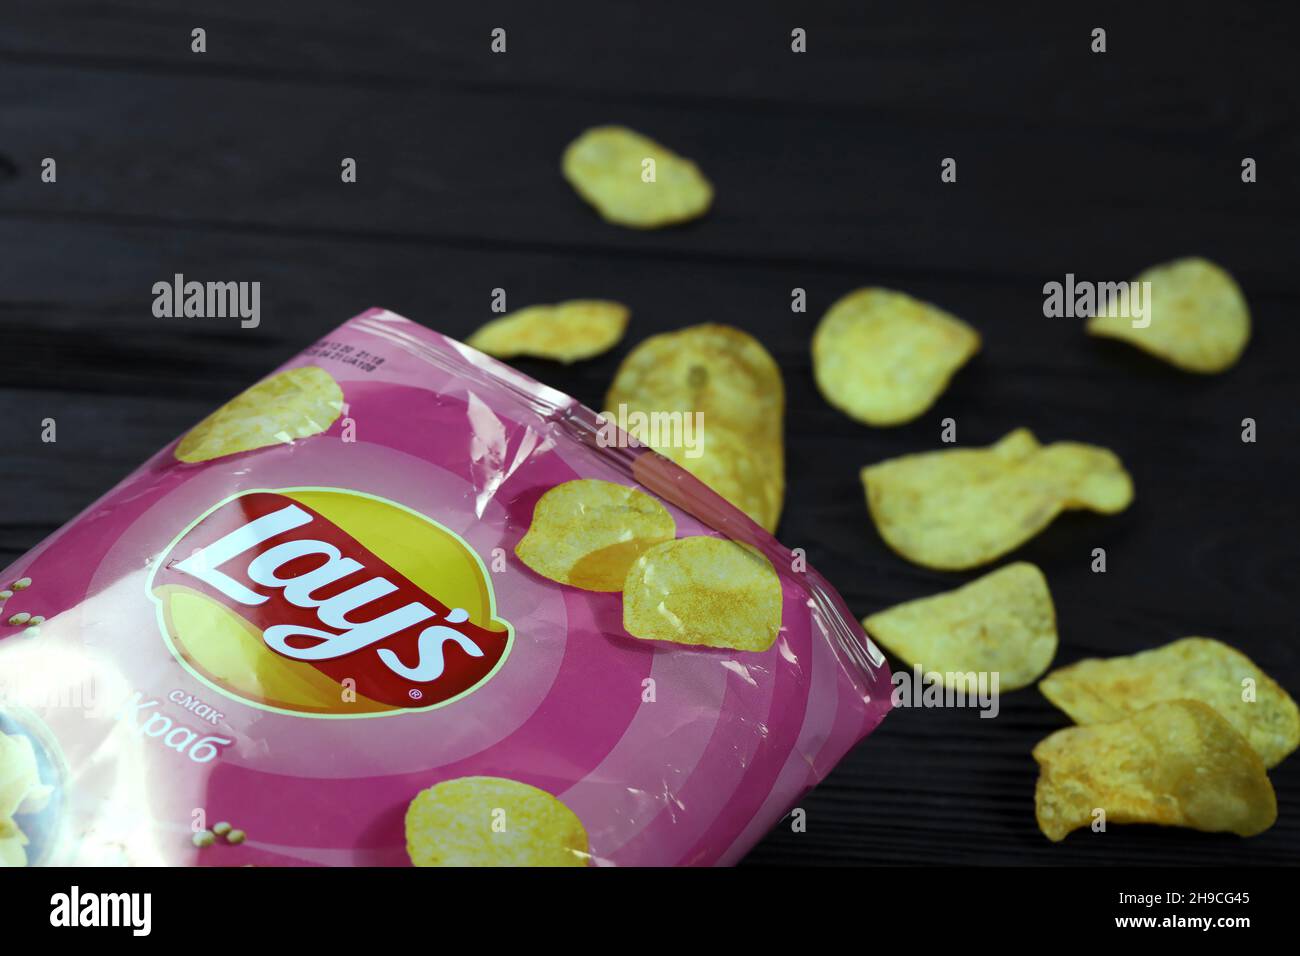 KHARKOV, UKRAINE - JANUARY 3, 2021: Lays potato chips with crab flavour and original lays logo in middle of package. Worldwide famous brand of potato Stock Photo